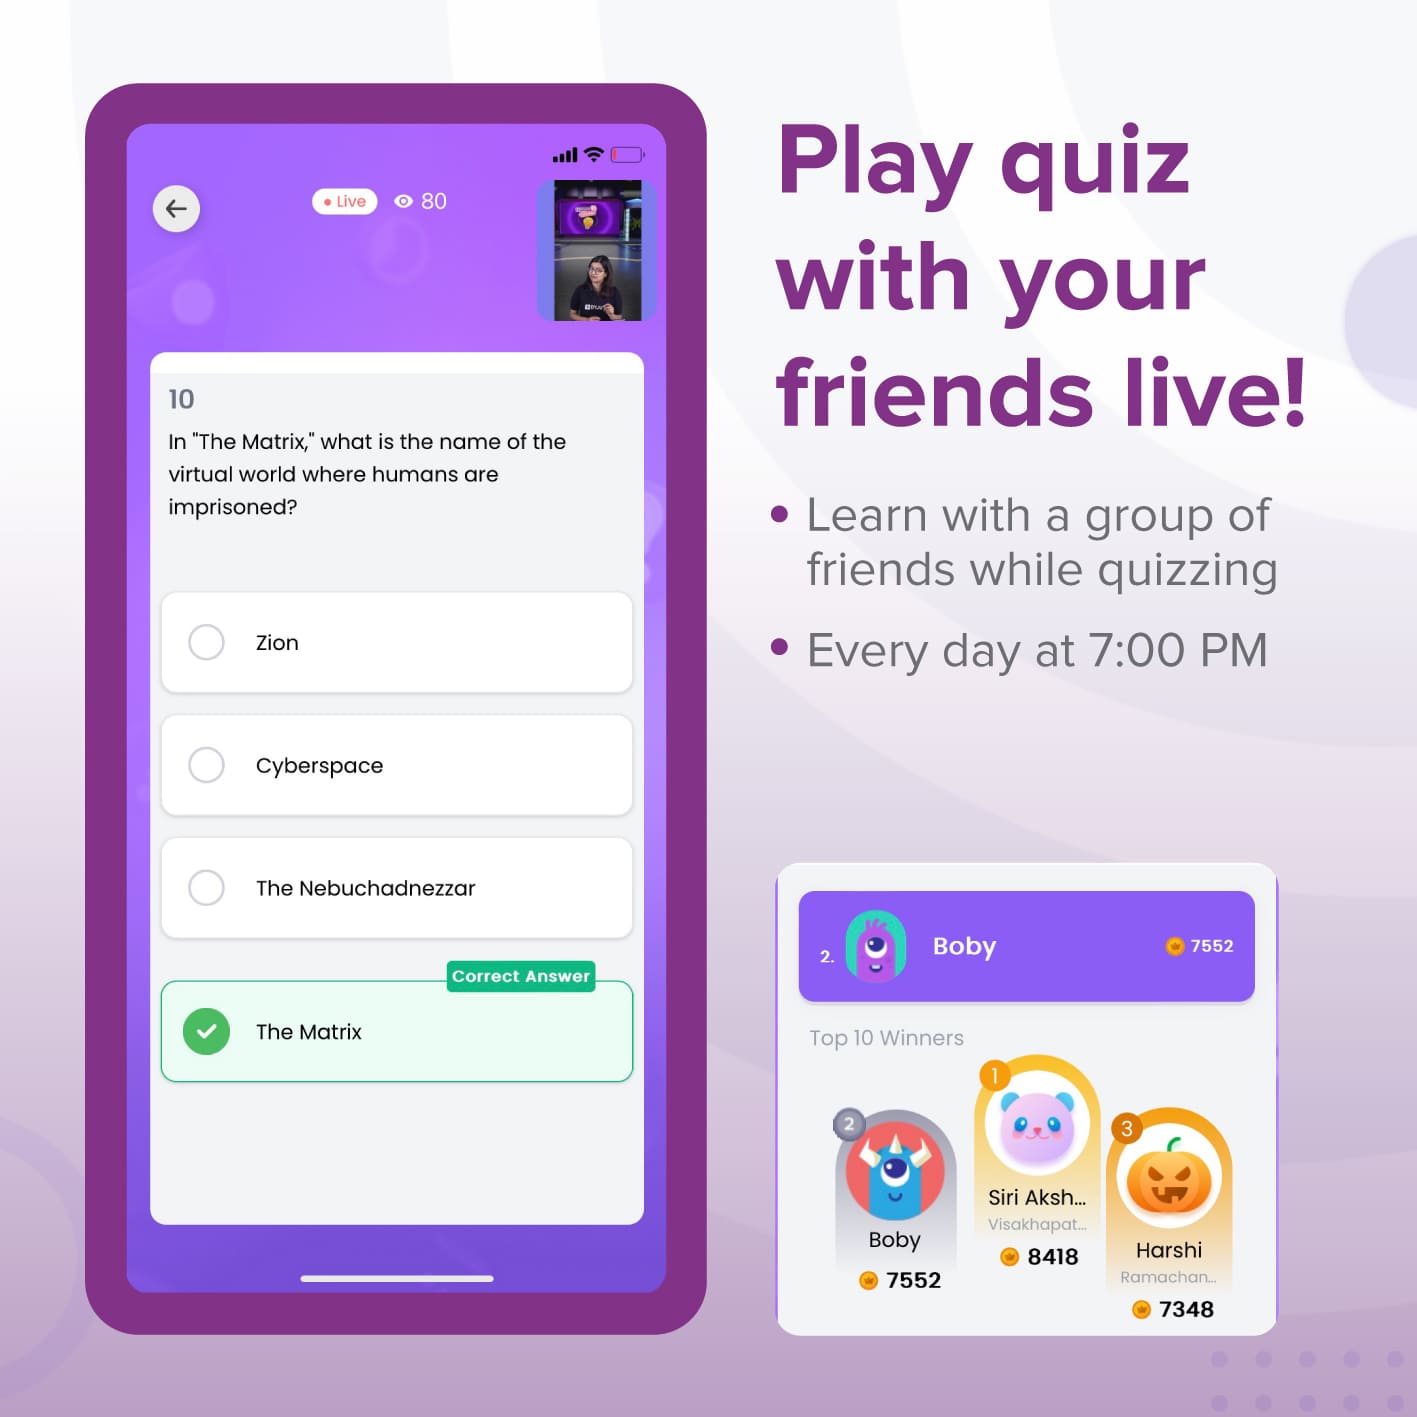 BYJUS The Learning App Premium Features